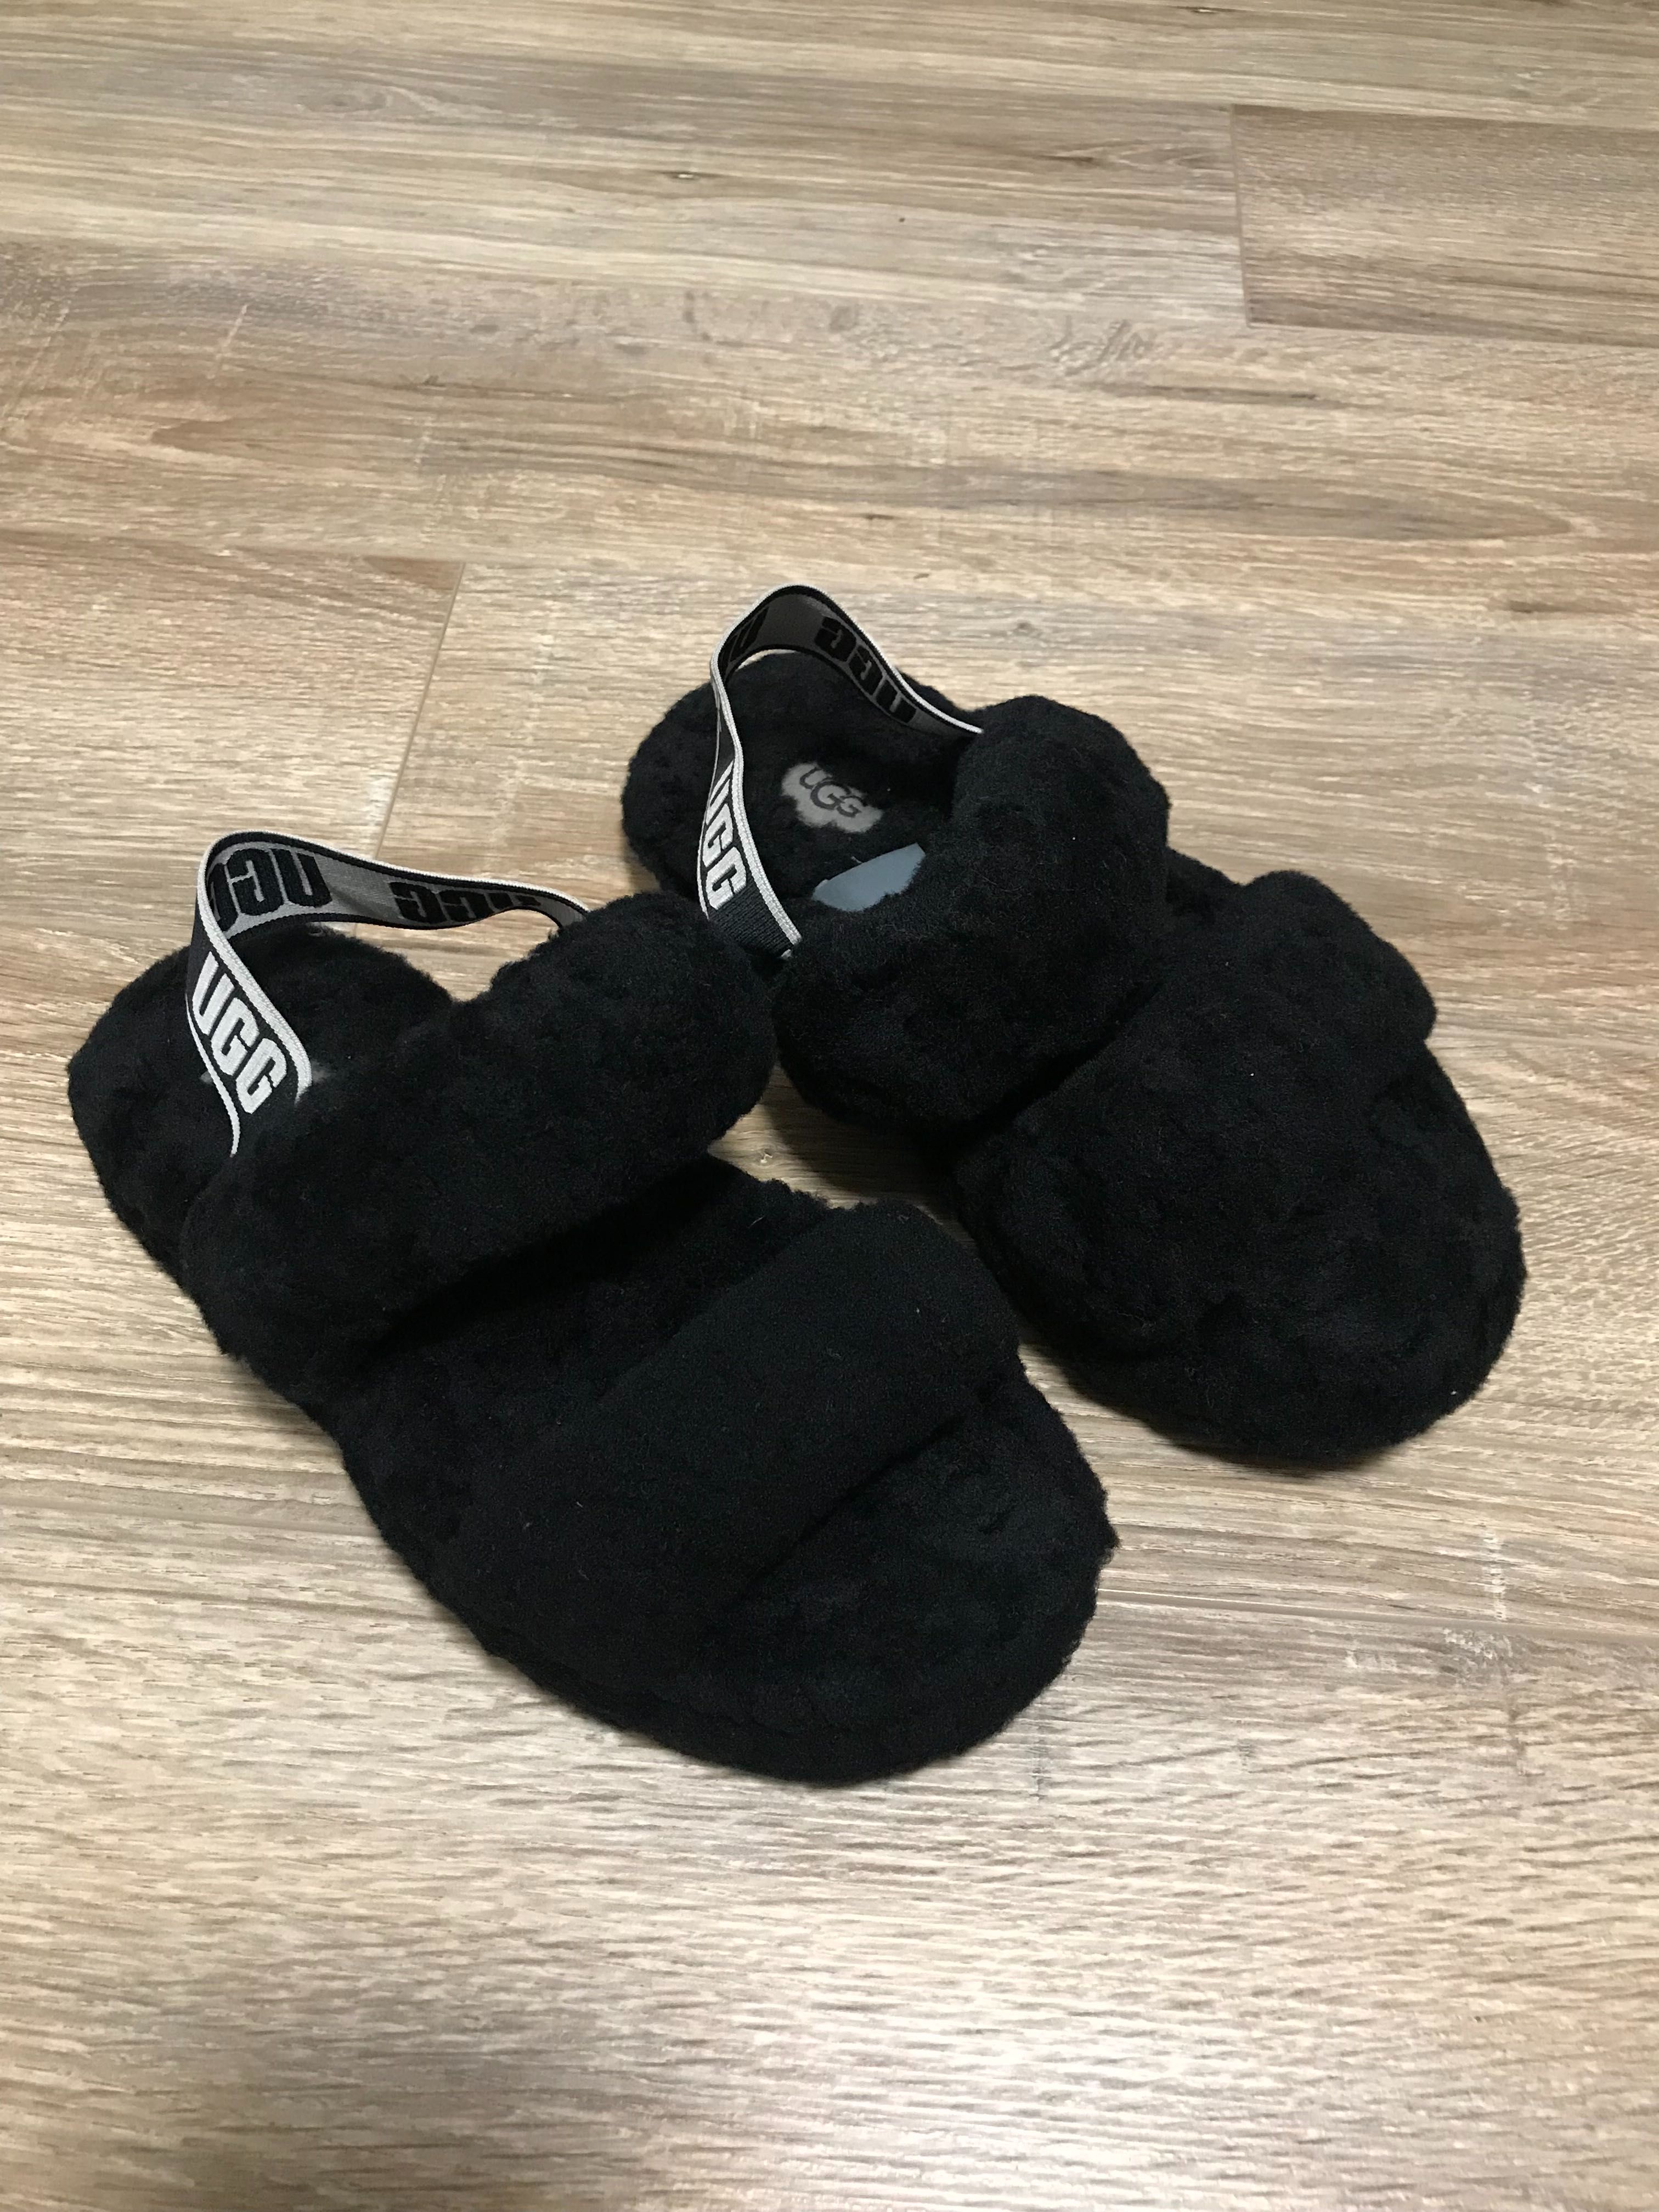 Athletic the same count up Ugg sandale pufoase Oradea • OLX.ro